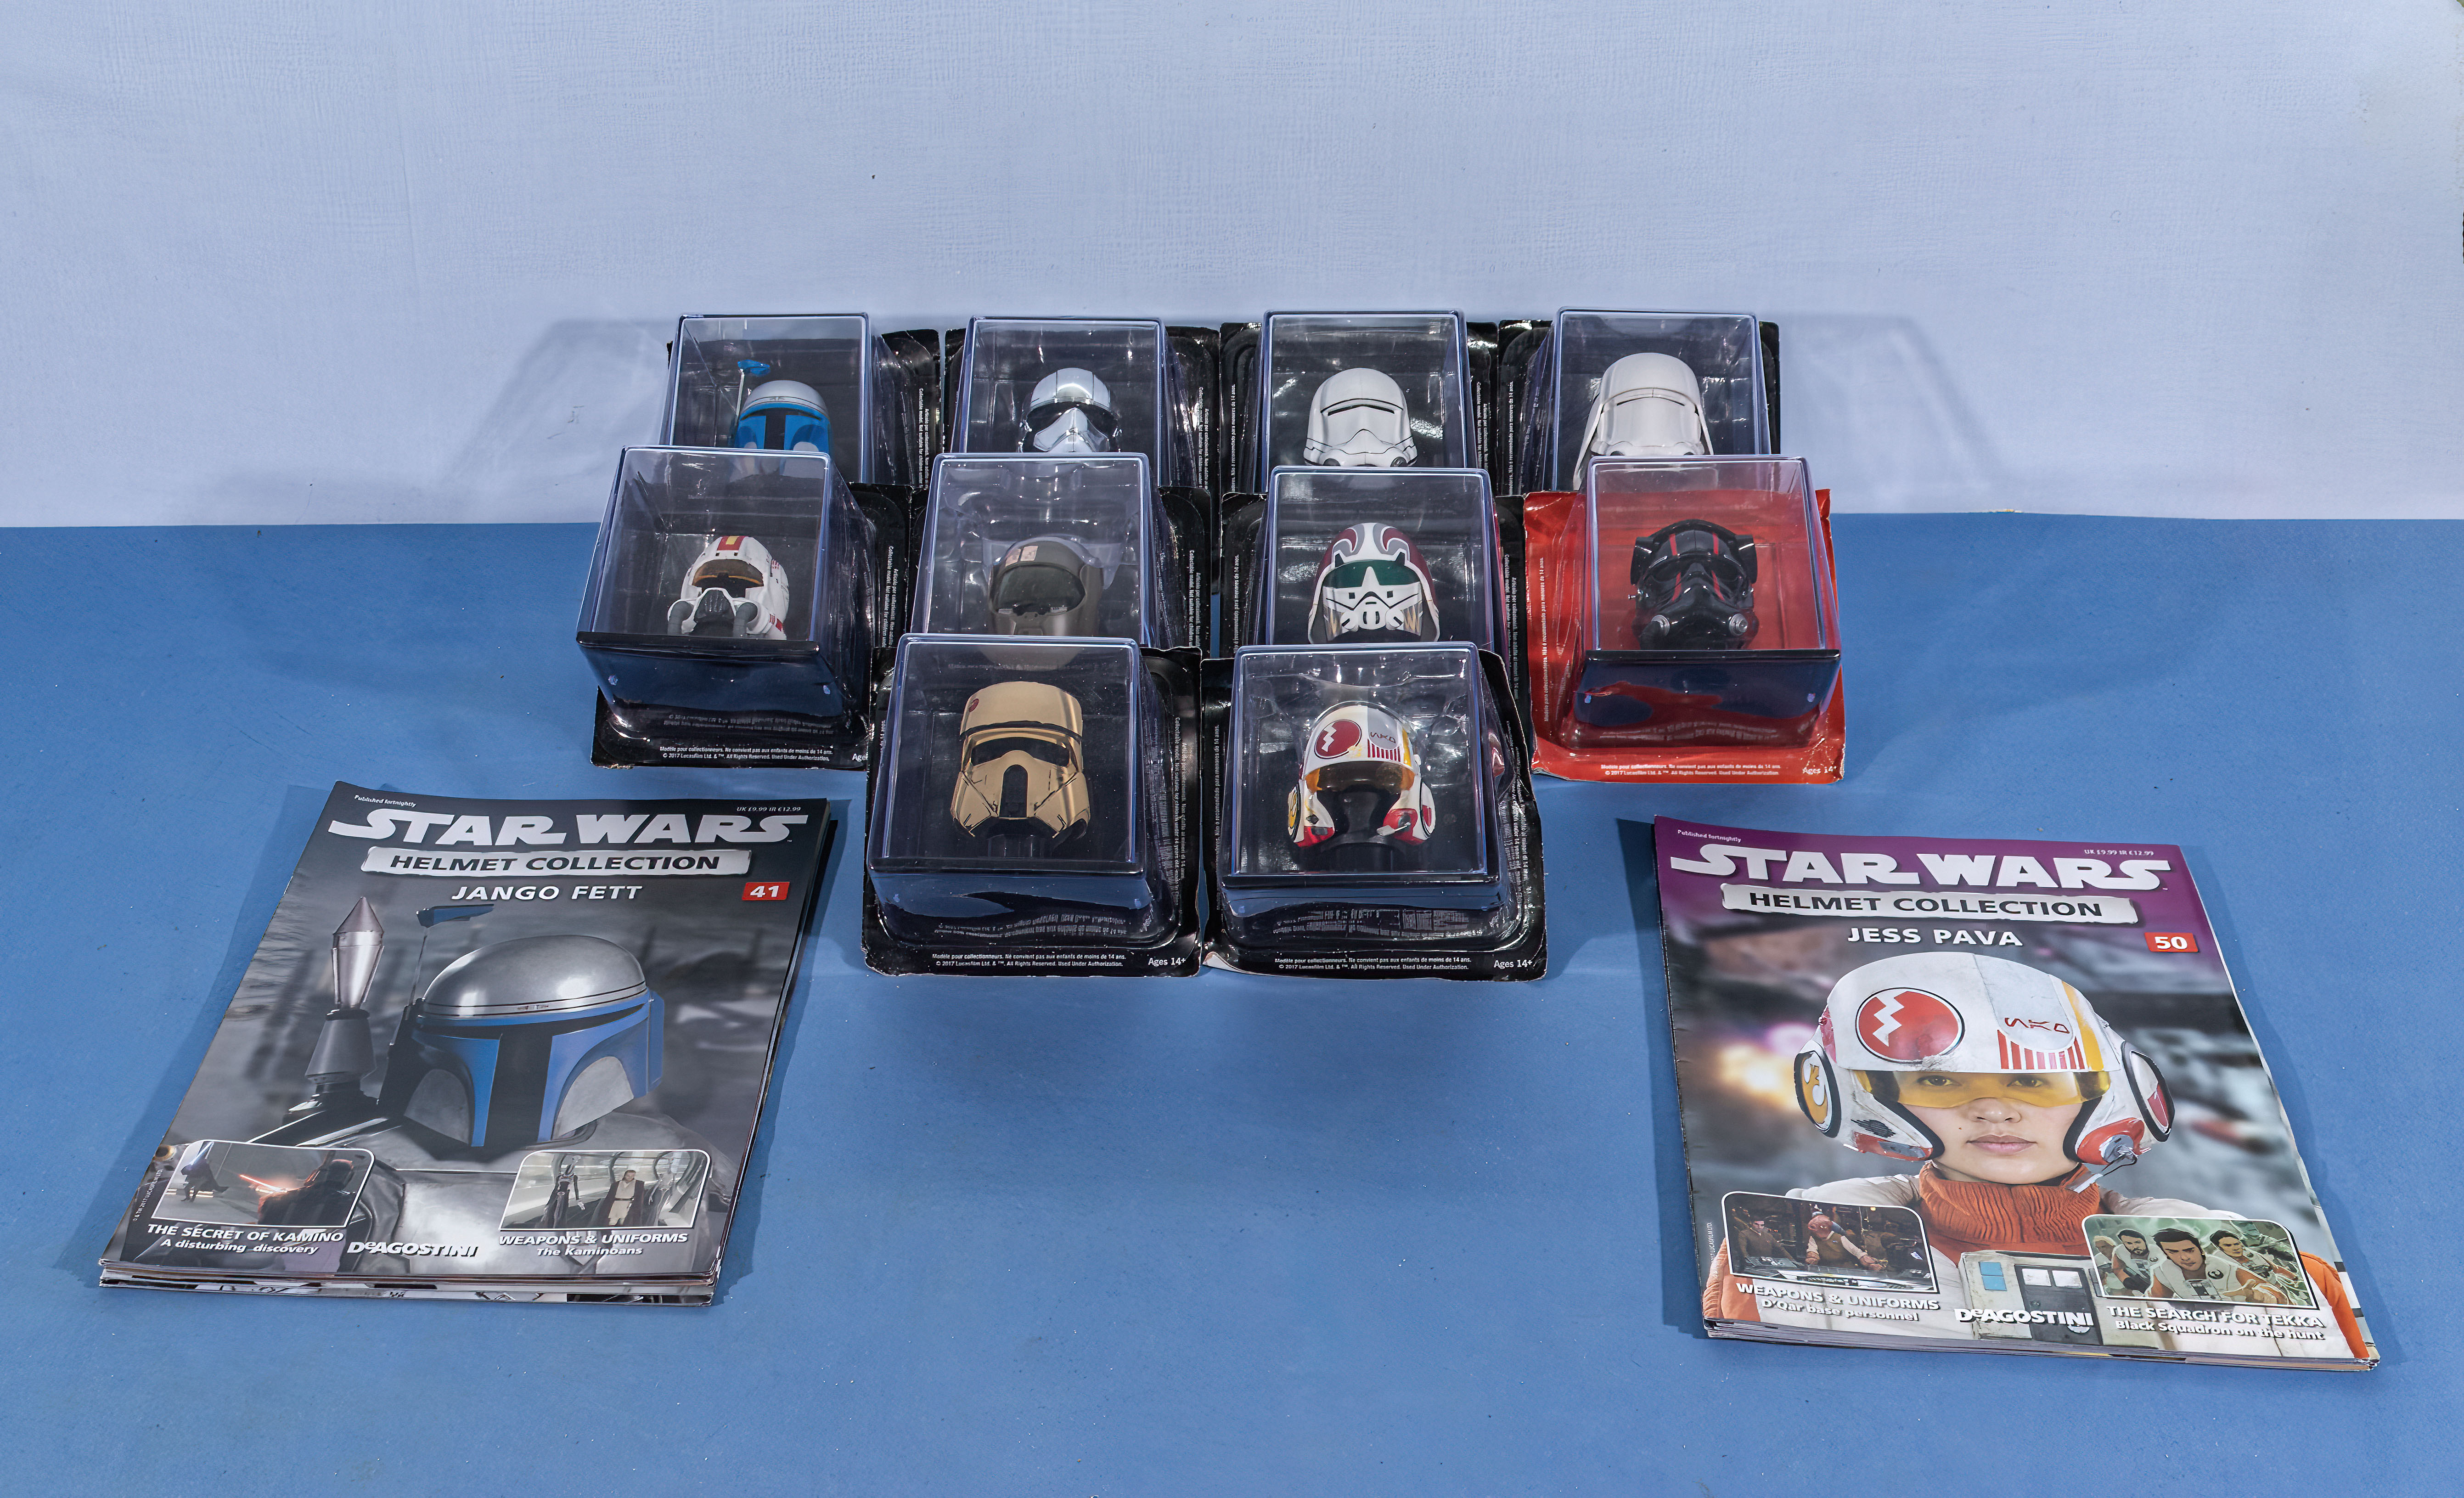 De Agostini Star Wars helmet collection with magazines # 41-50